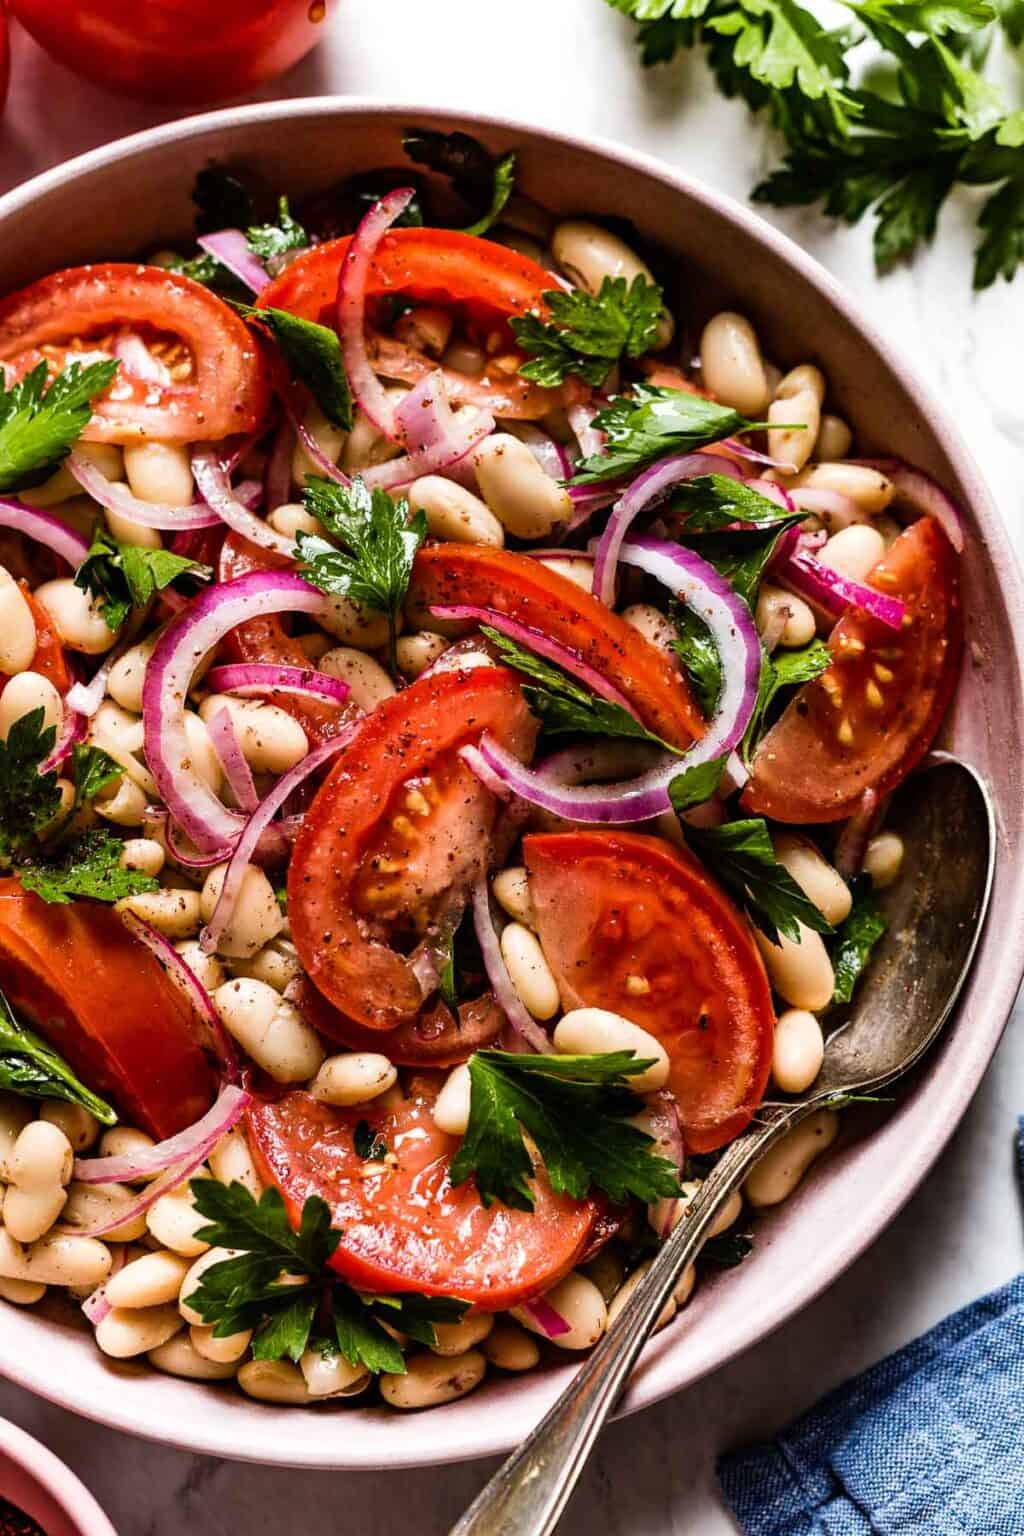 Piyaz - Turkish White Bean Salad Recipe {Authentic} - Foolproof Living